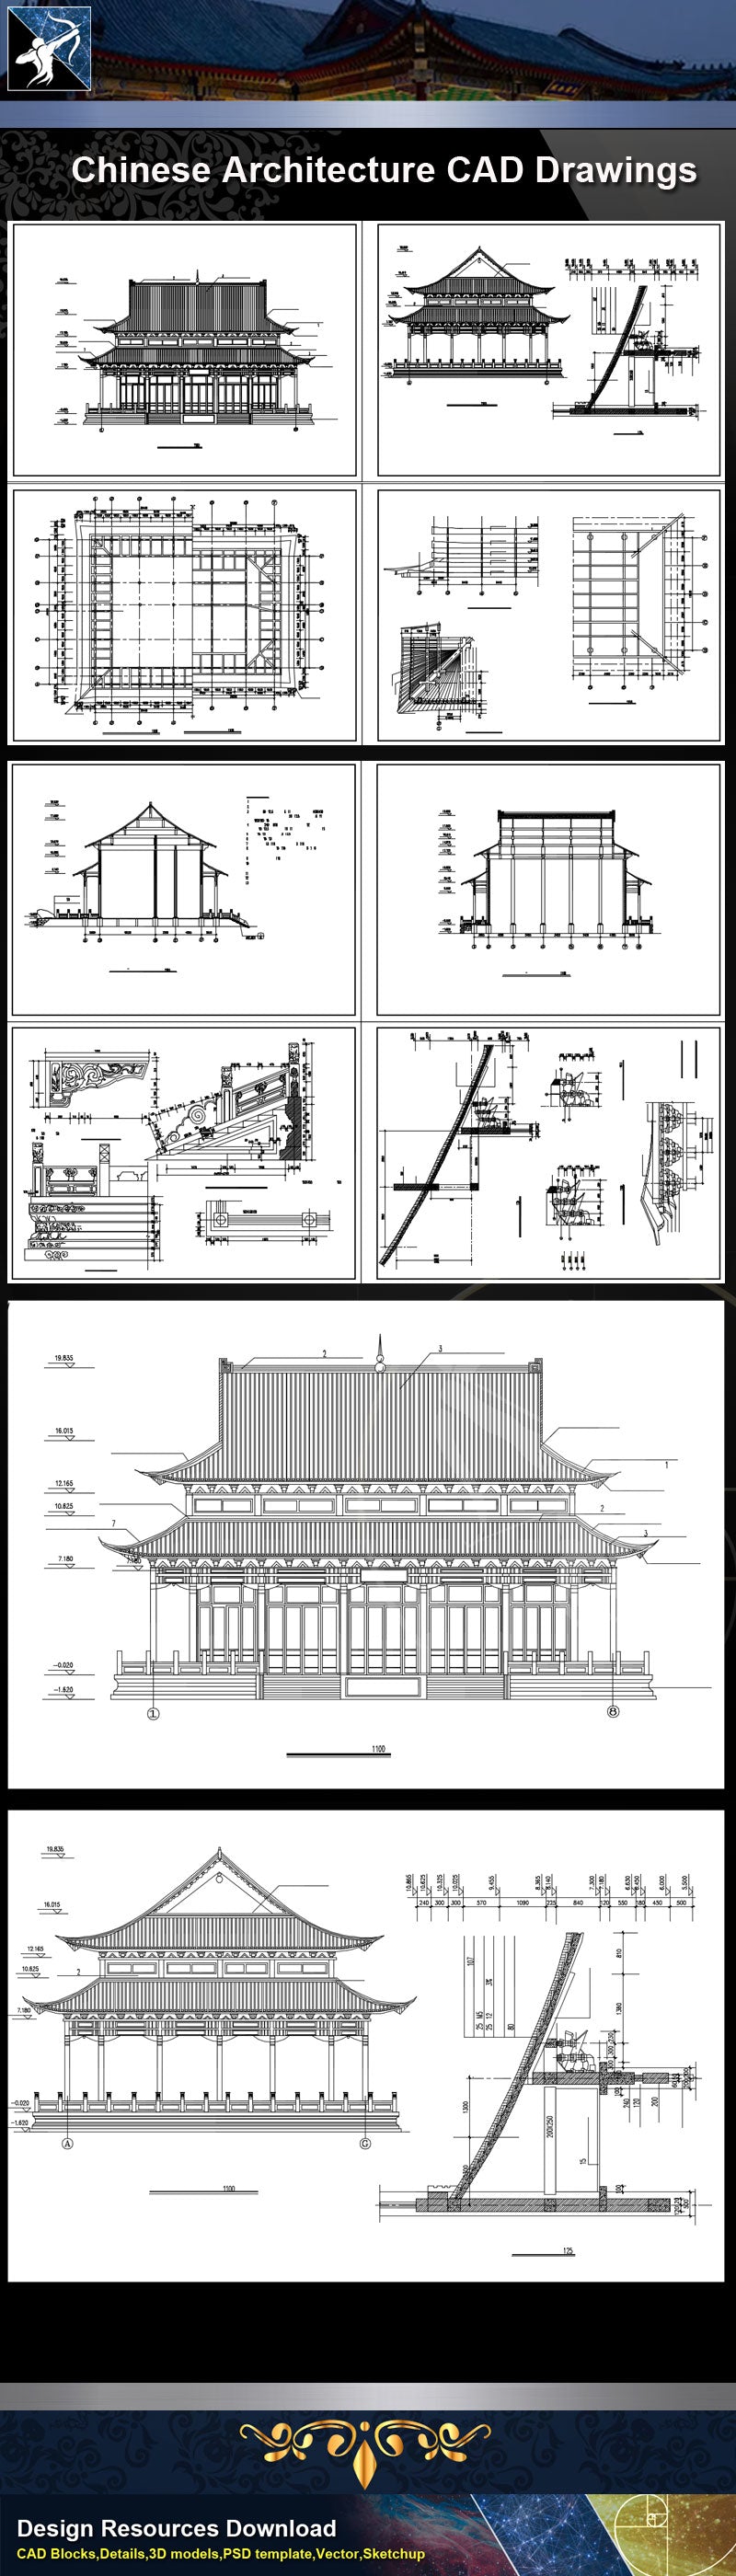 ★Chinese Architecture CAD Drawings-Grand Hall-Chinese Temple